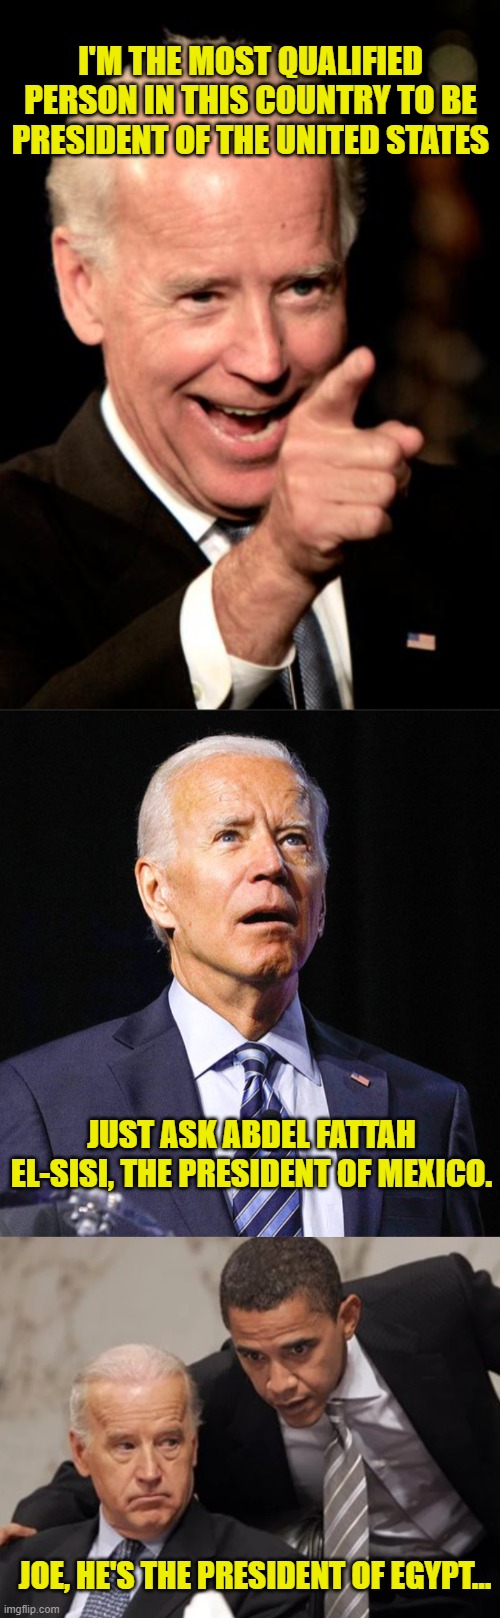 Just Ask the President of Mexico! | I'M THE MOST QUALIFIED PERSON IN THIS COUNTRY TO BE PRESIDENT OF THE UNITED STATES; JUST ASK ABDEL FATTAH EL-SISI, THE PRESIDENT OF MEXICO. JOE, HE'S THE PRESIDENT OF EGYPT... | image tagged in memes,smilin biden,joe biden,egypt,mexico,obama | made w/ Imgflip meme maker